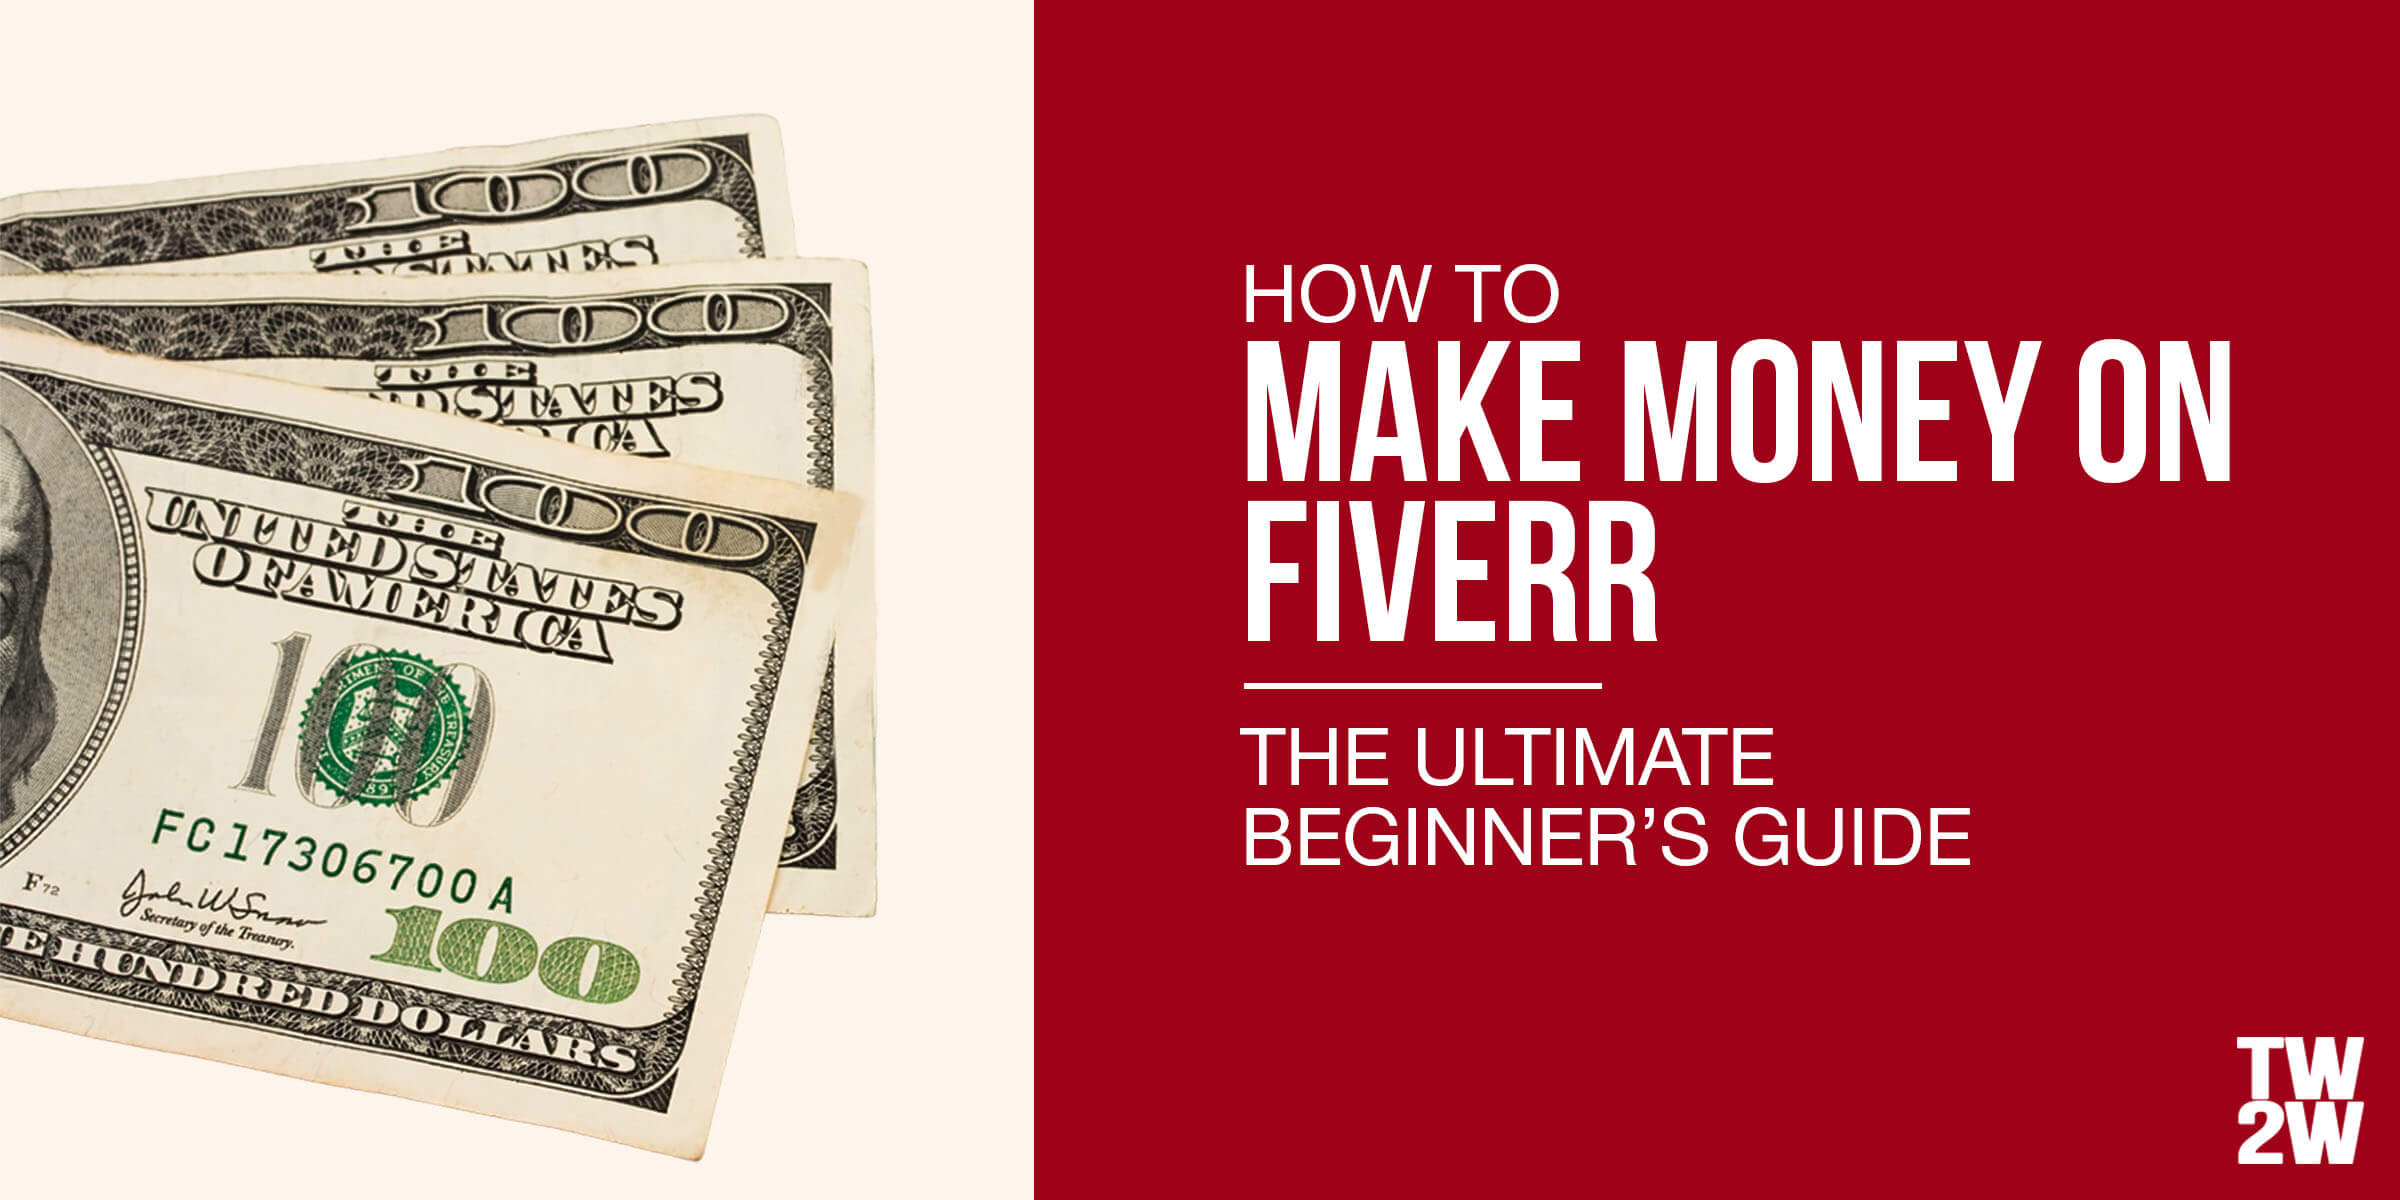 Can a New Seller Make Money on Fiverr in 2021?